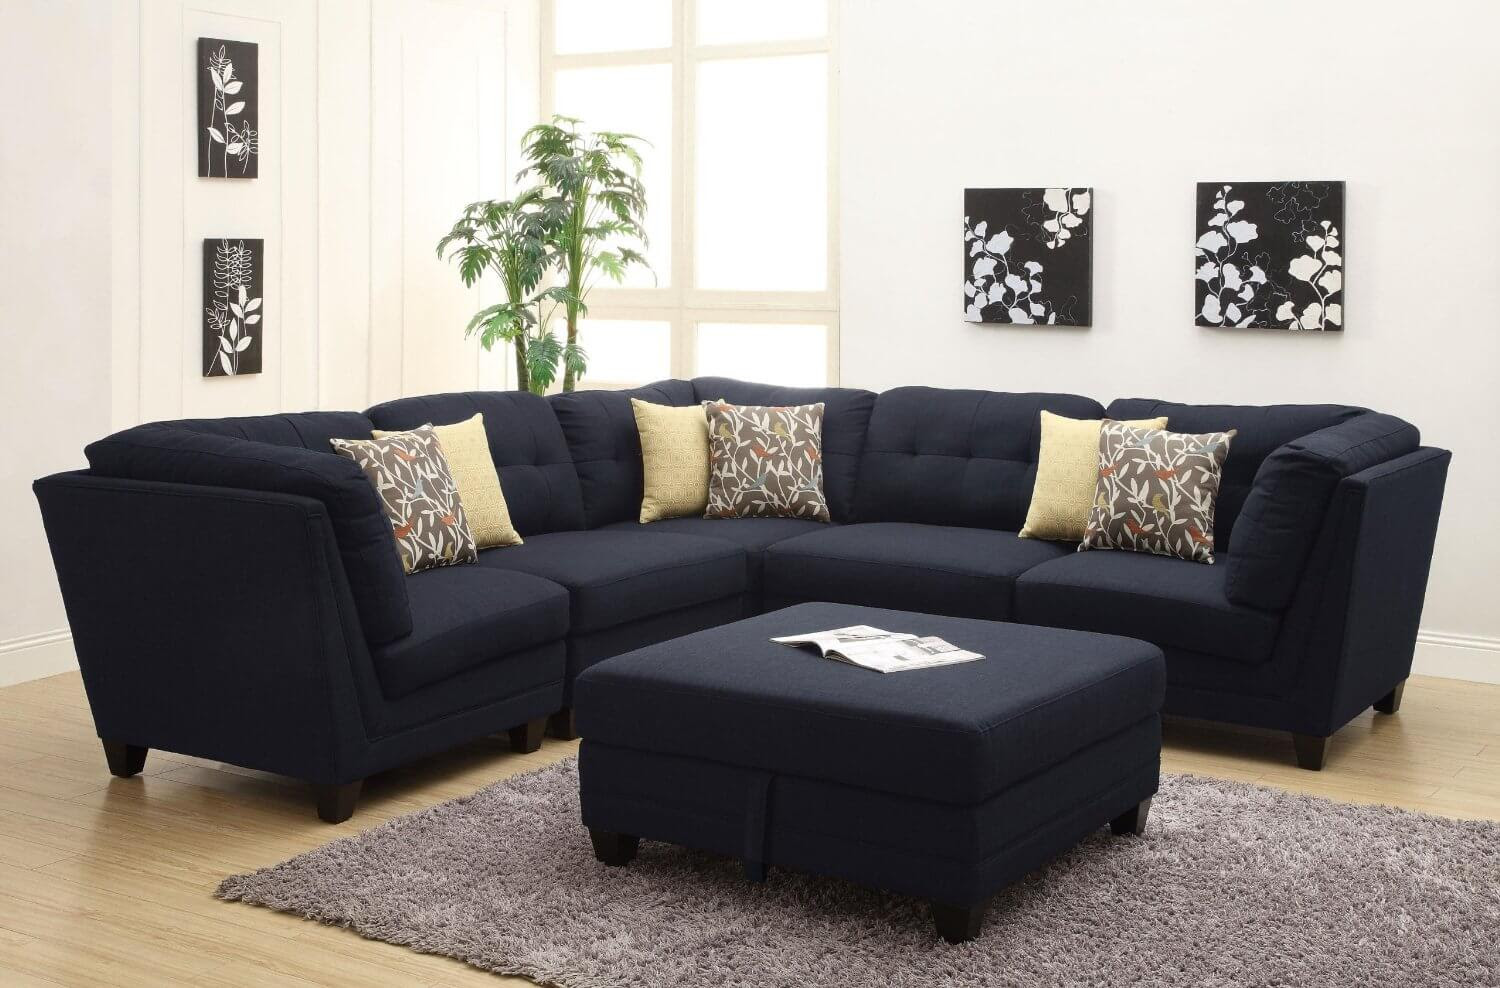 37 Beautiful Sectional Sofas Under $1,000